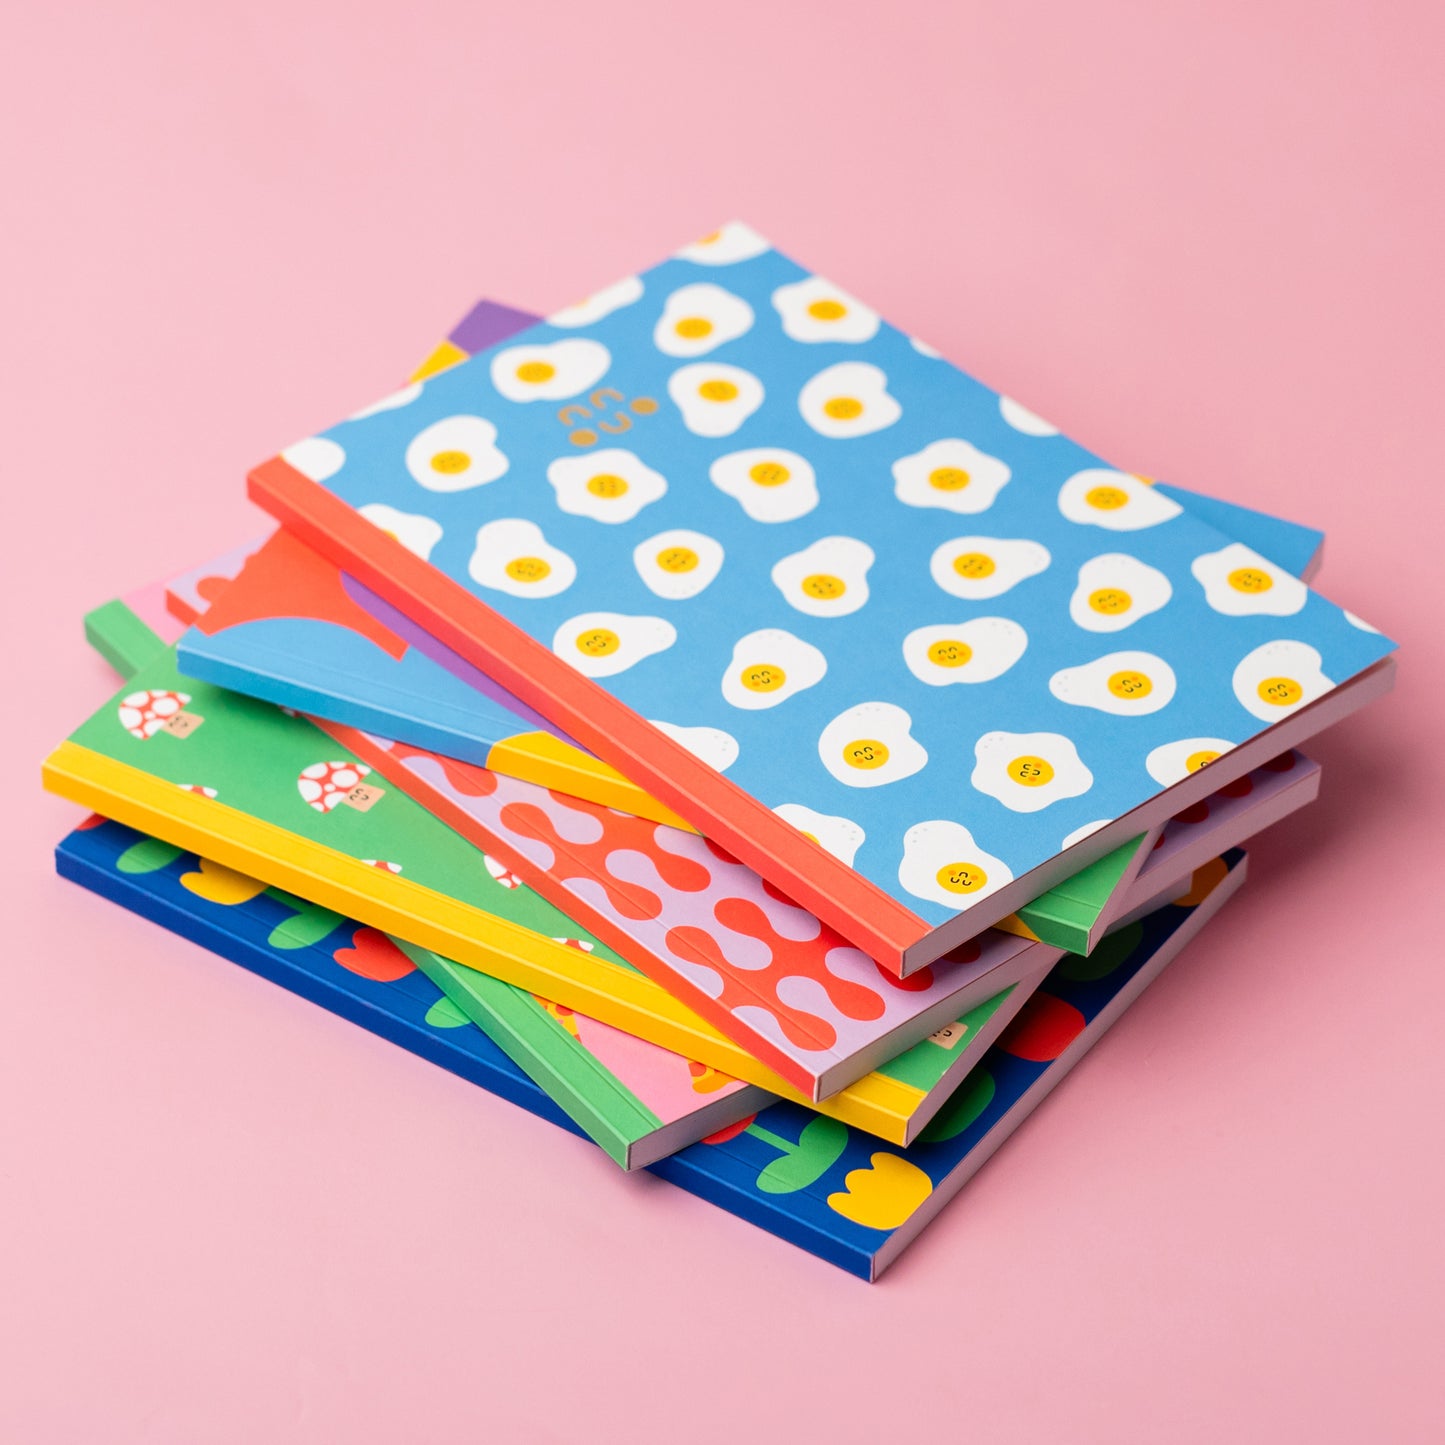 a stack of colourful notebooks with various cute patterns on them including eggs, mushrooms and flowers